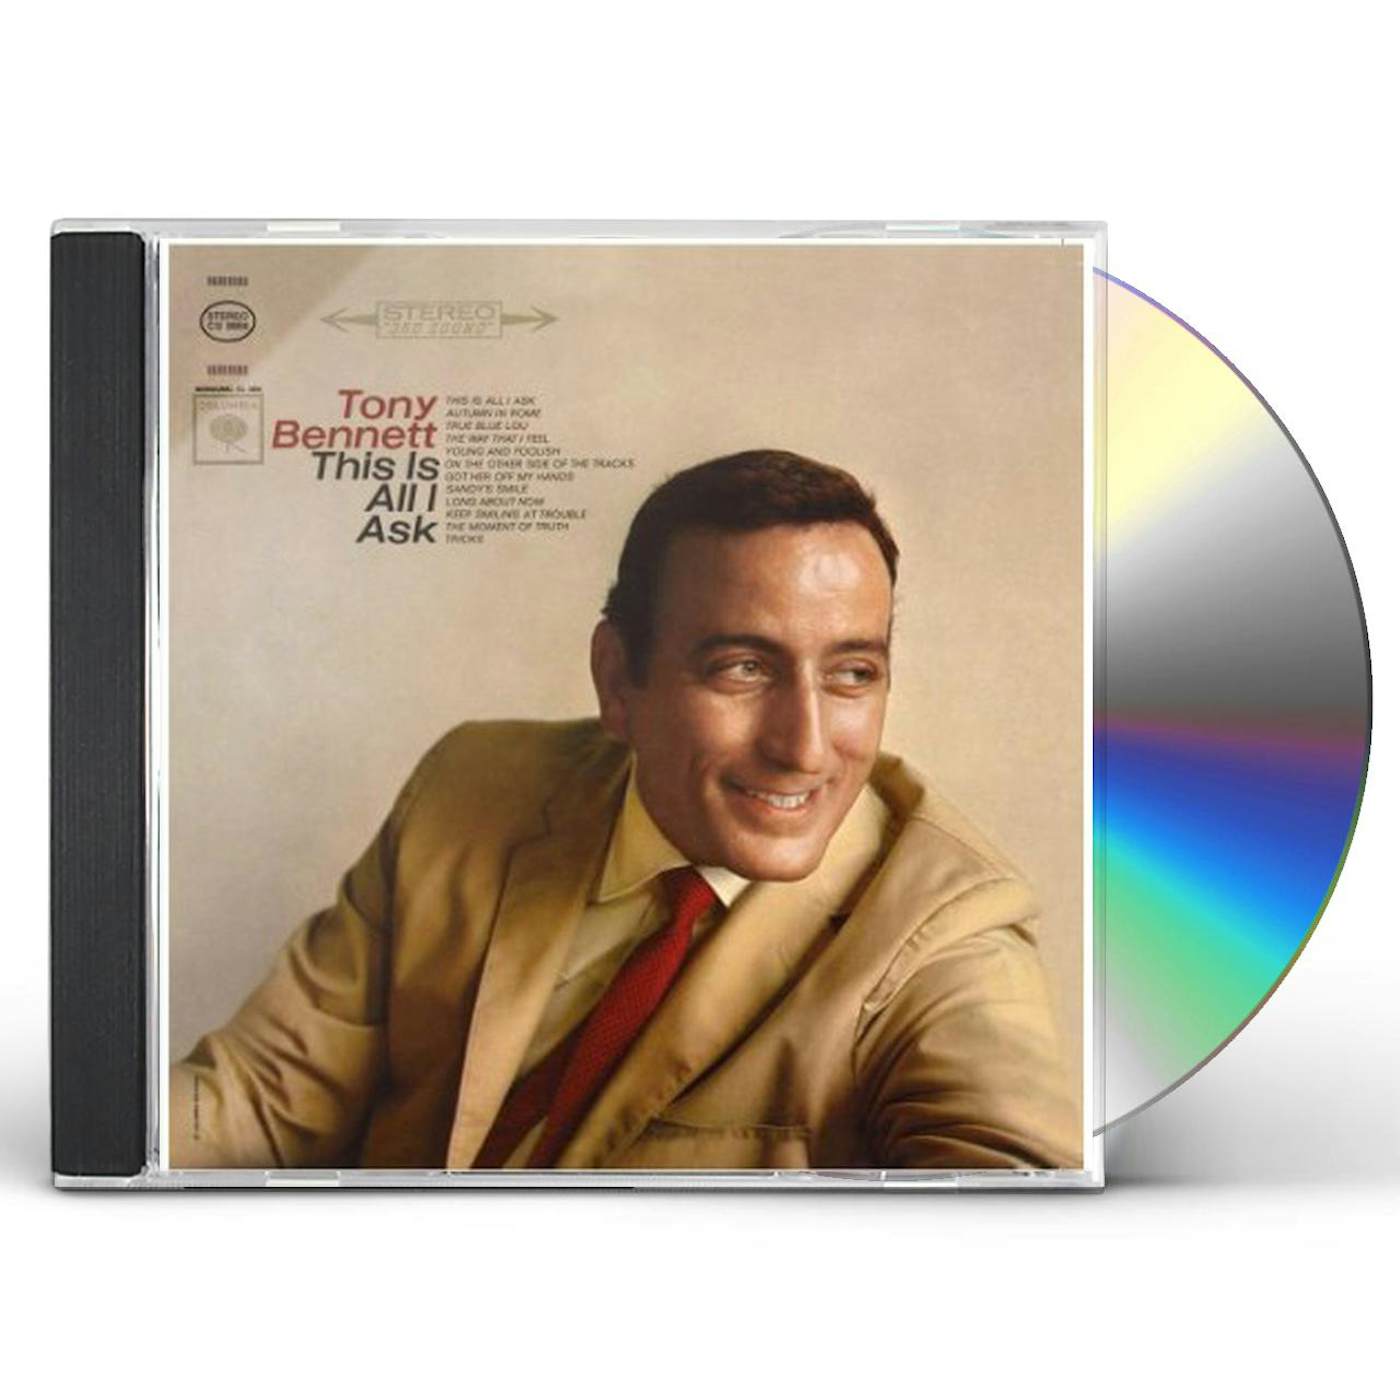 Tony Bennett THIS IS ALL I ASK CD